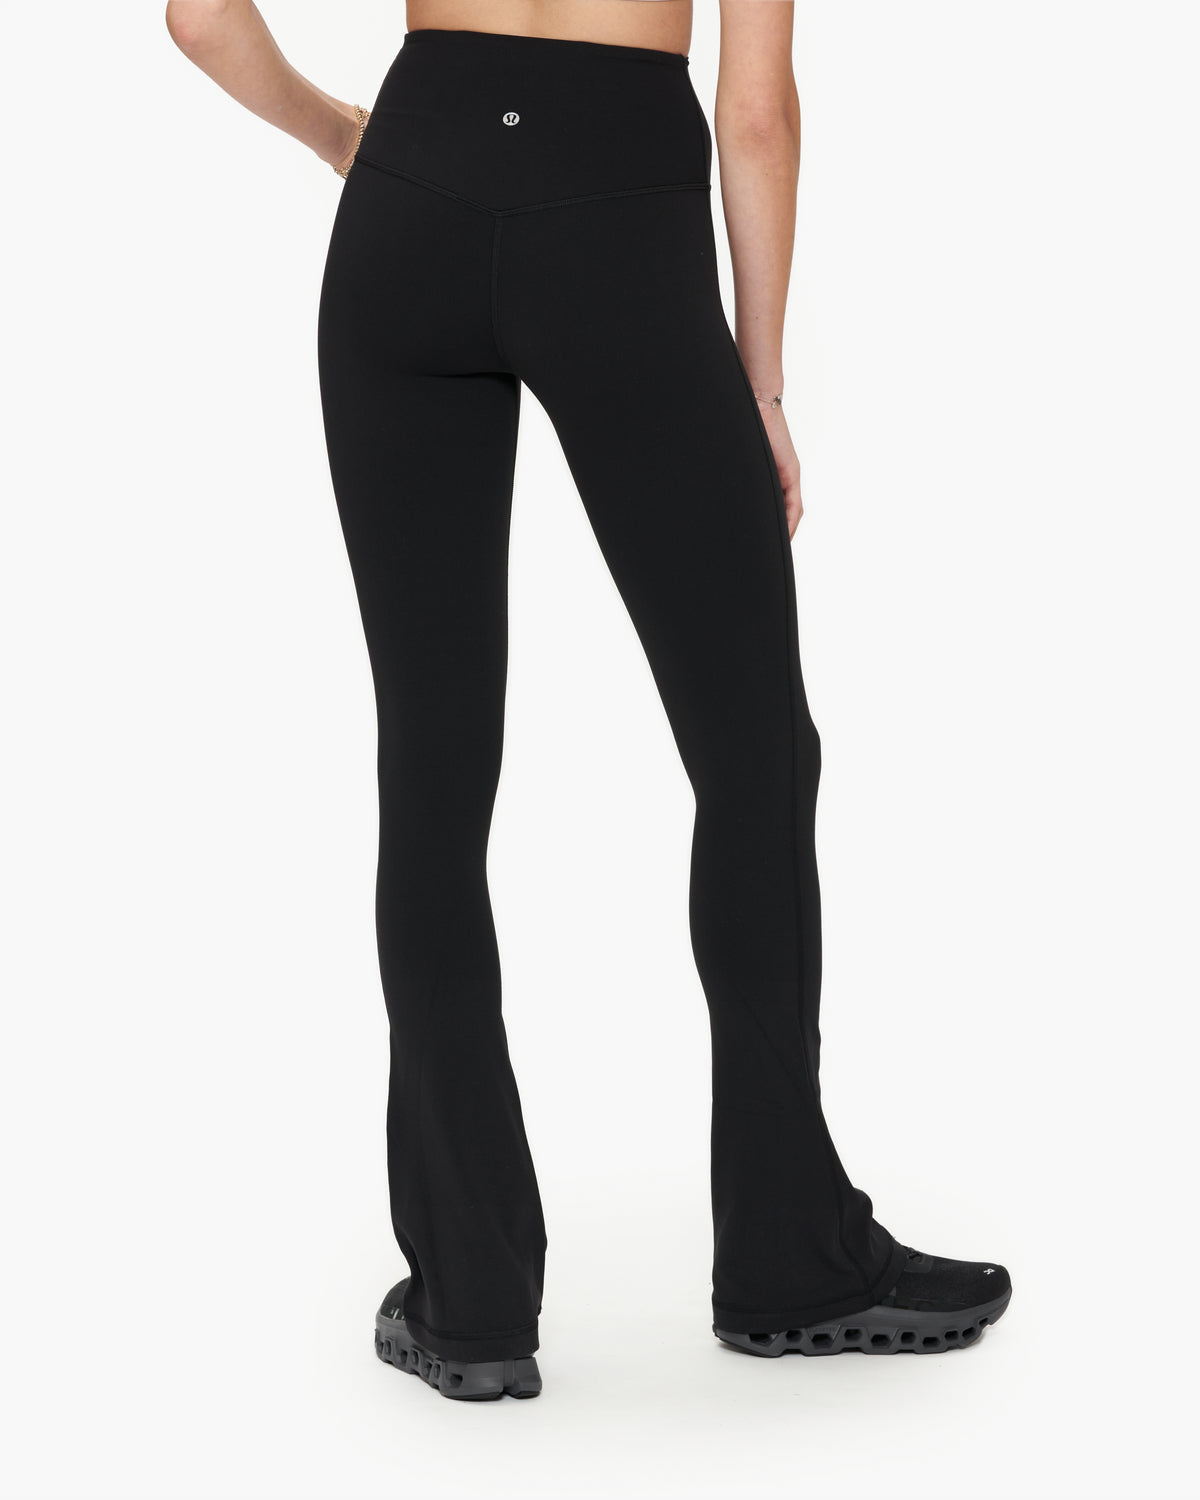 Lululemon Align High Rise Flare Pant 32 – The Shop at Equinox